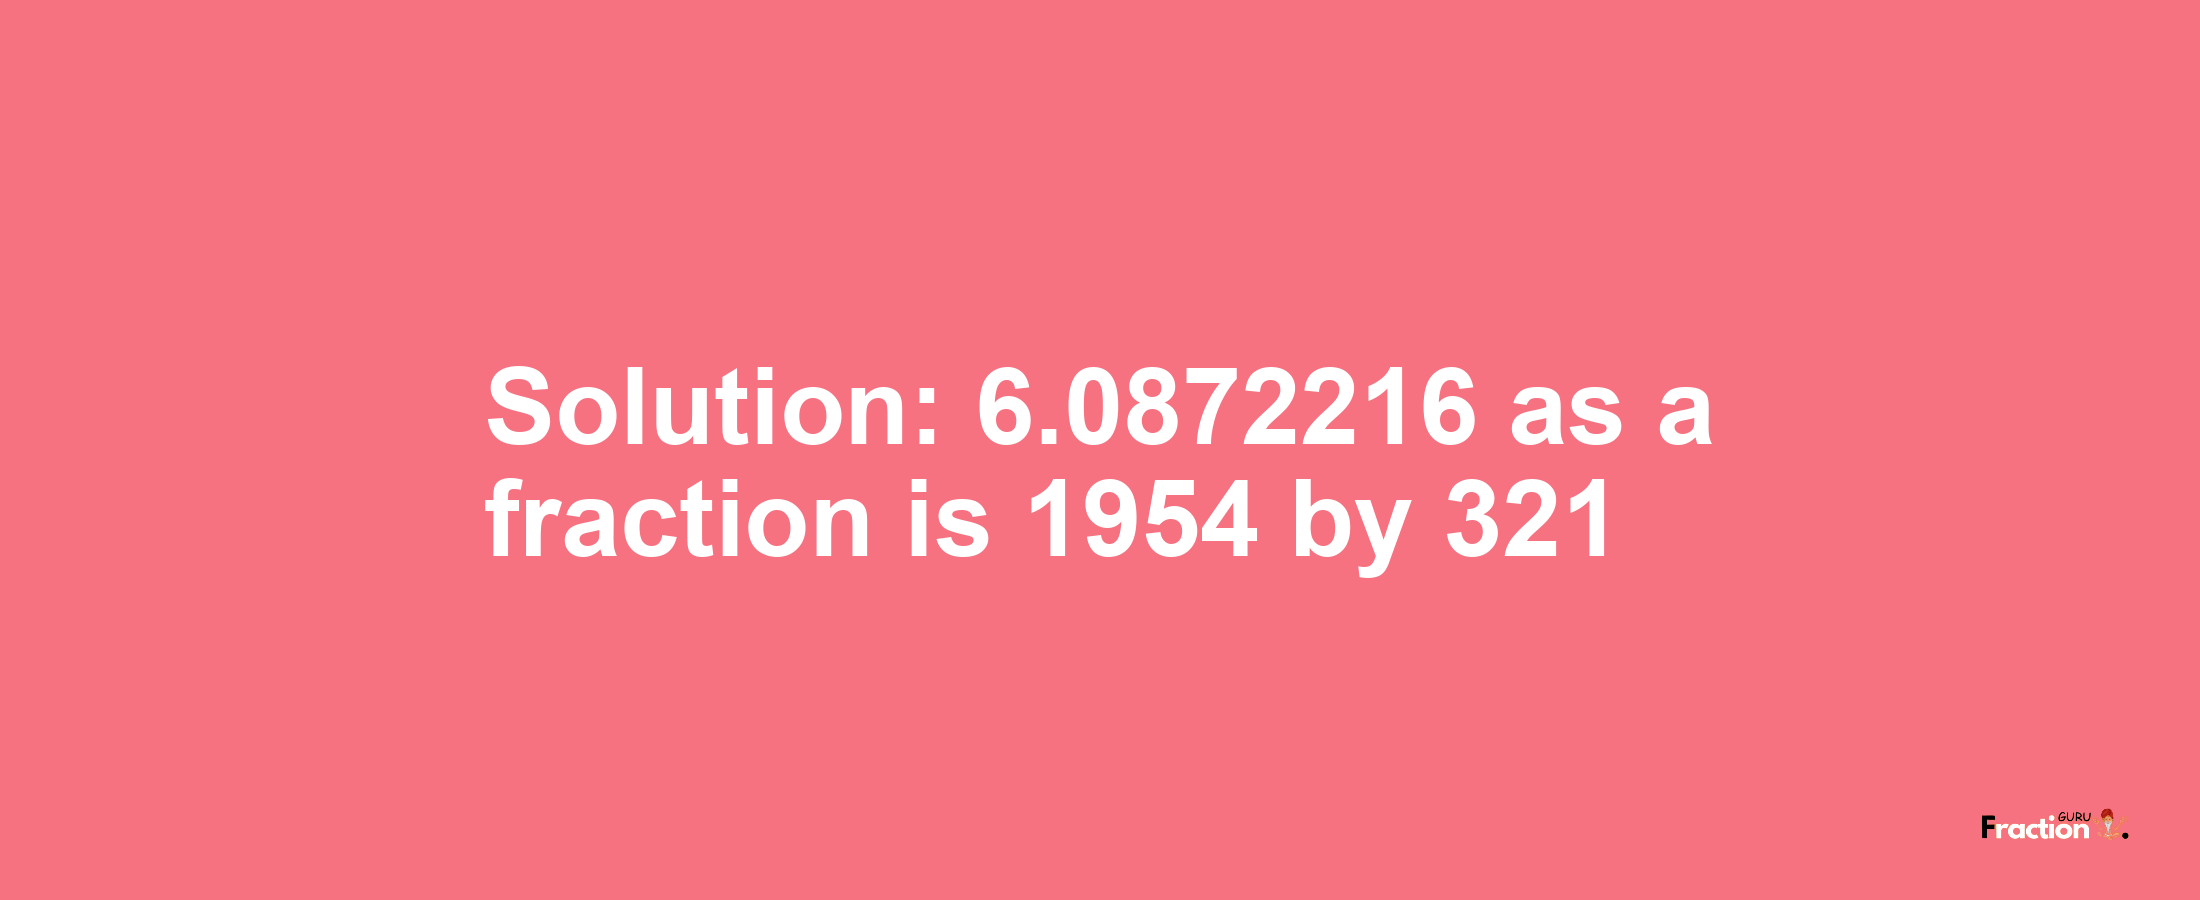 Solution:6.0872216 as a fraction is 1954/321